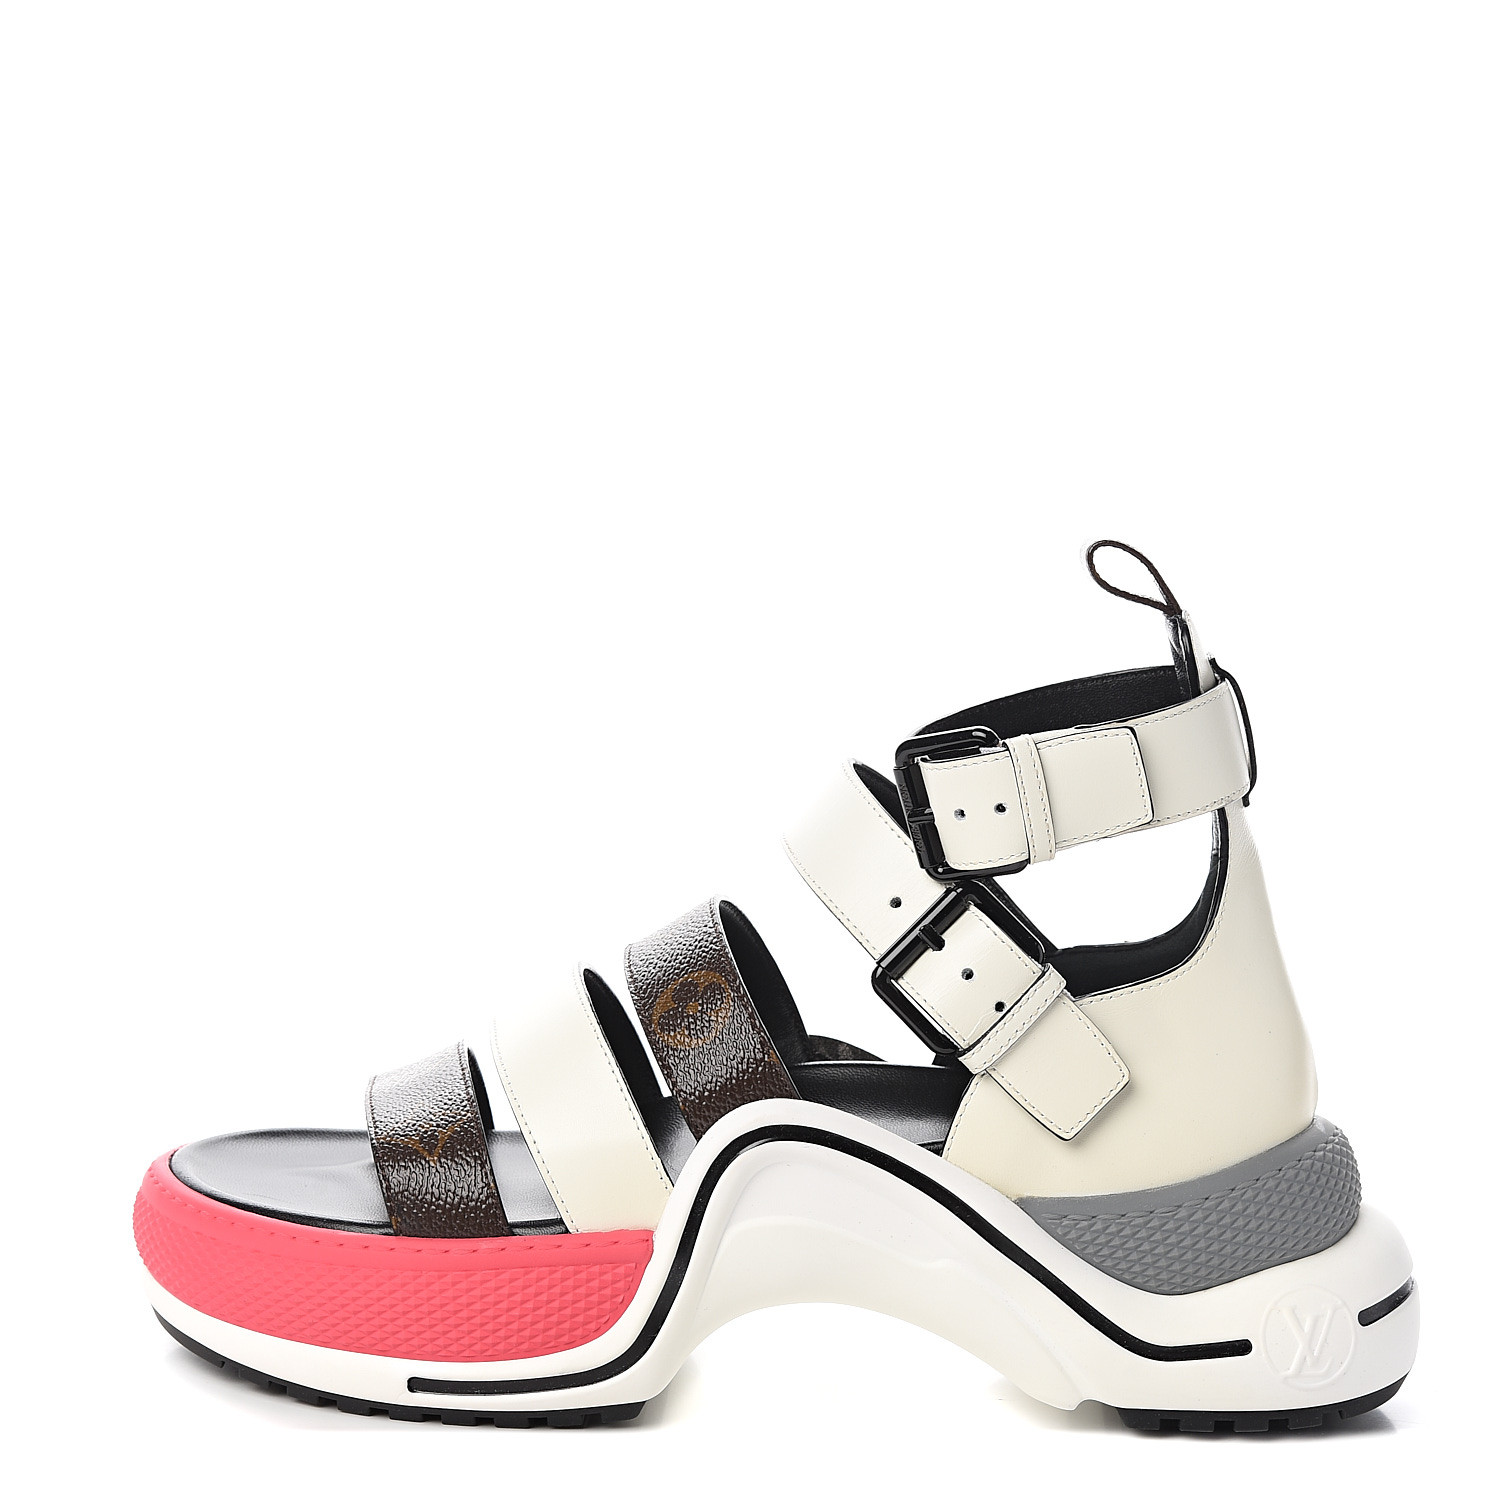 Lv Archlight Sporty Sandal  Natural Resource Department